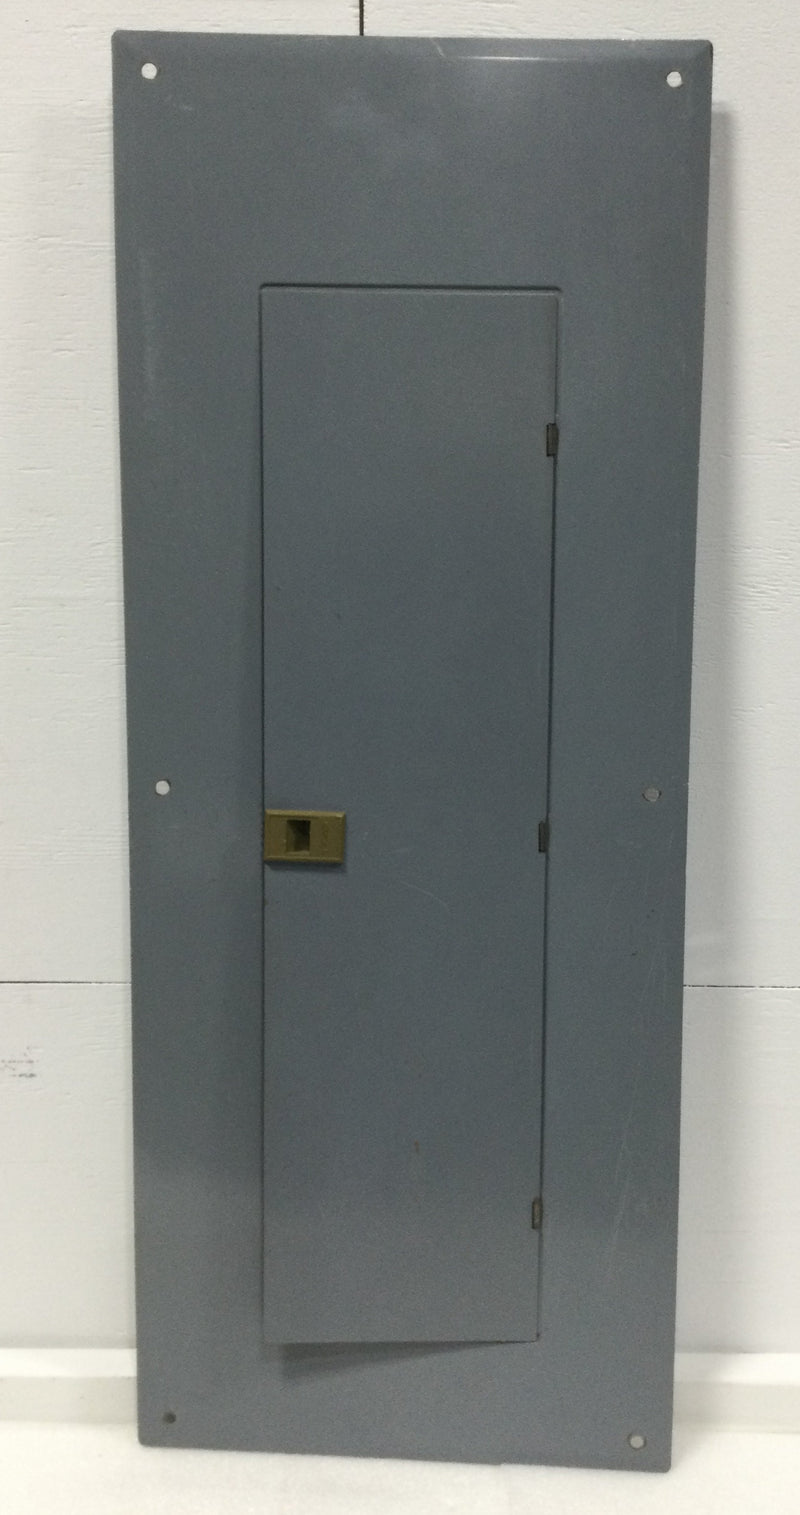 Square D/Homeline HOM40M200C Series 2 Single Phase 200A 40Space Main Breaker Type Cover Only 39.25 x 15 5"